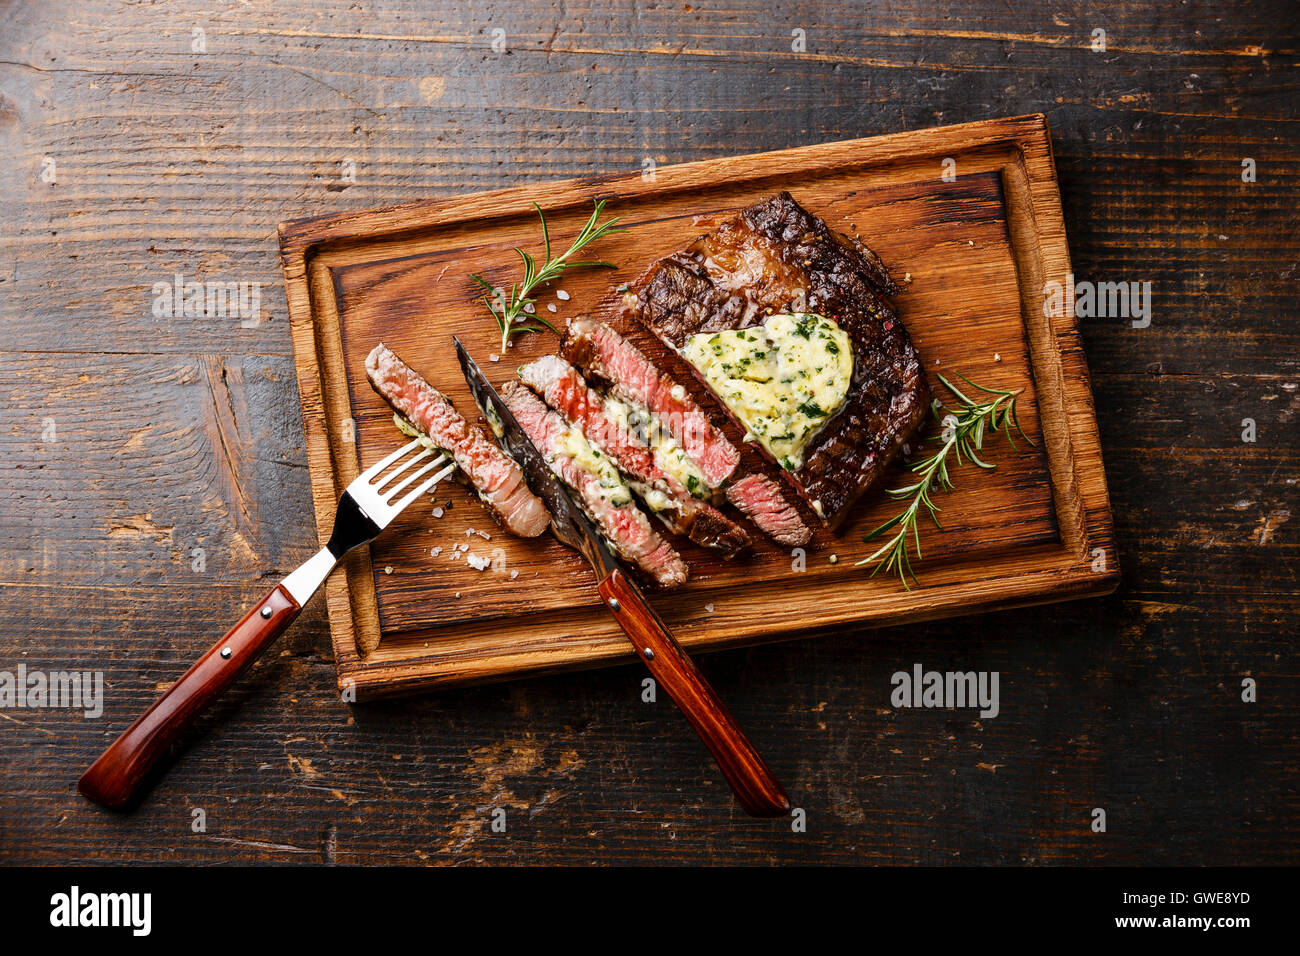 Sliced grilled Medium rare steak Ribeye with herb butter on cutting board on wooden background Stock Photo